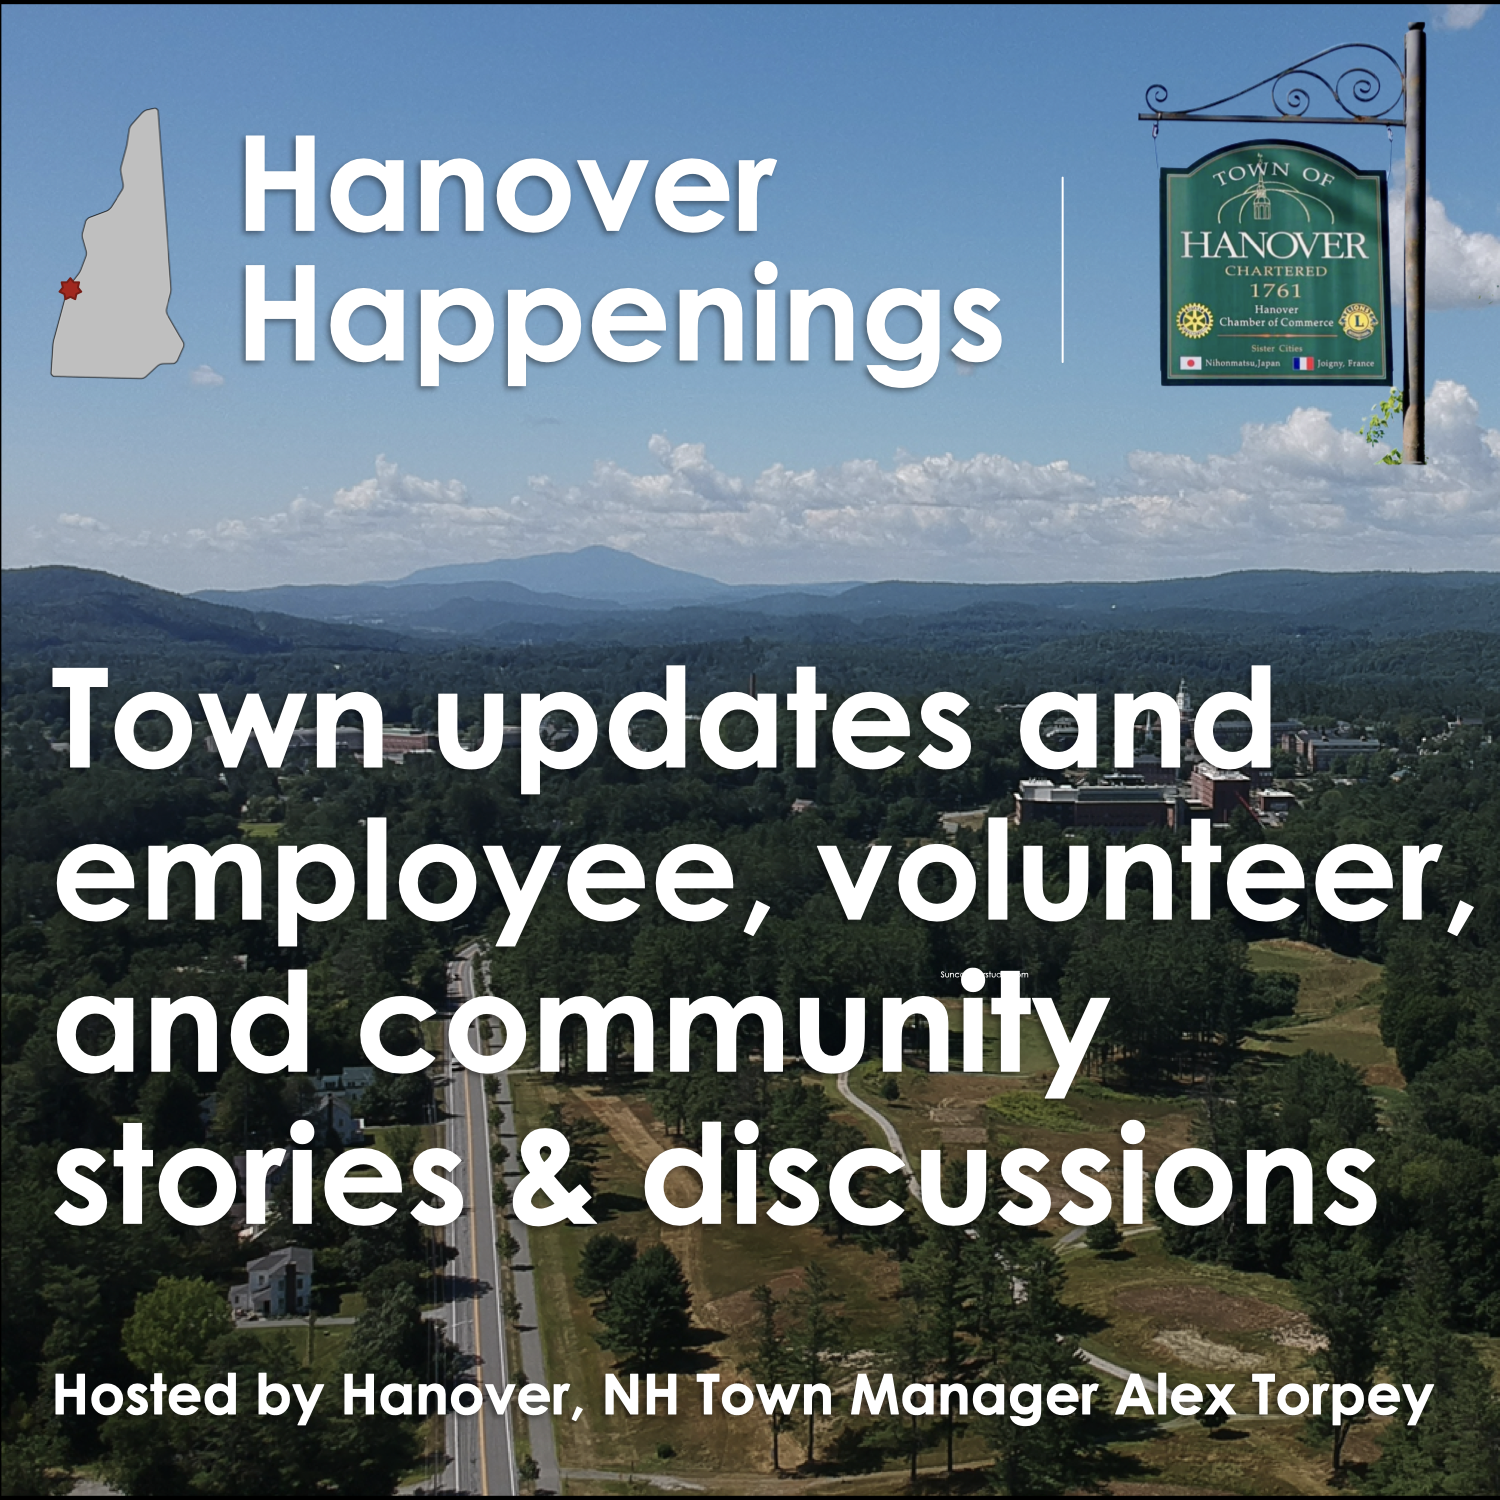 Hanover Happenings February Recap and Budget Information